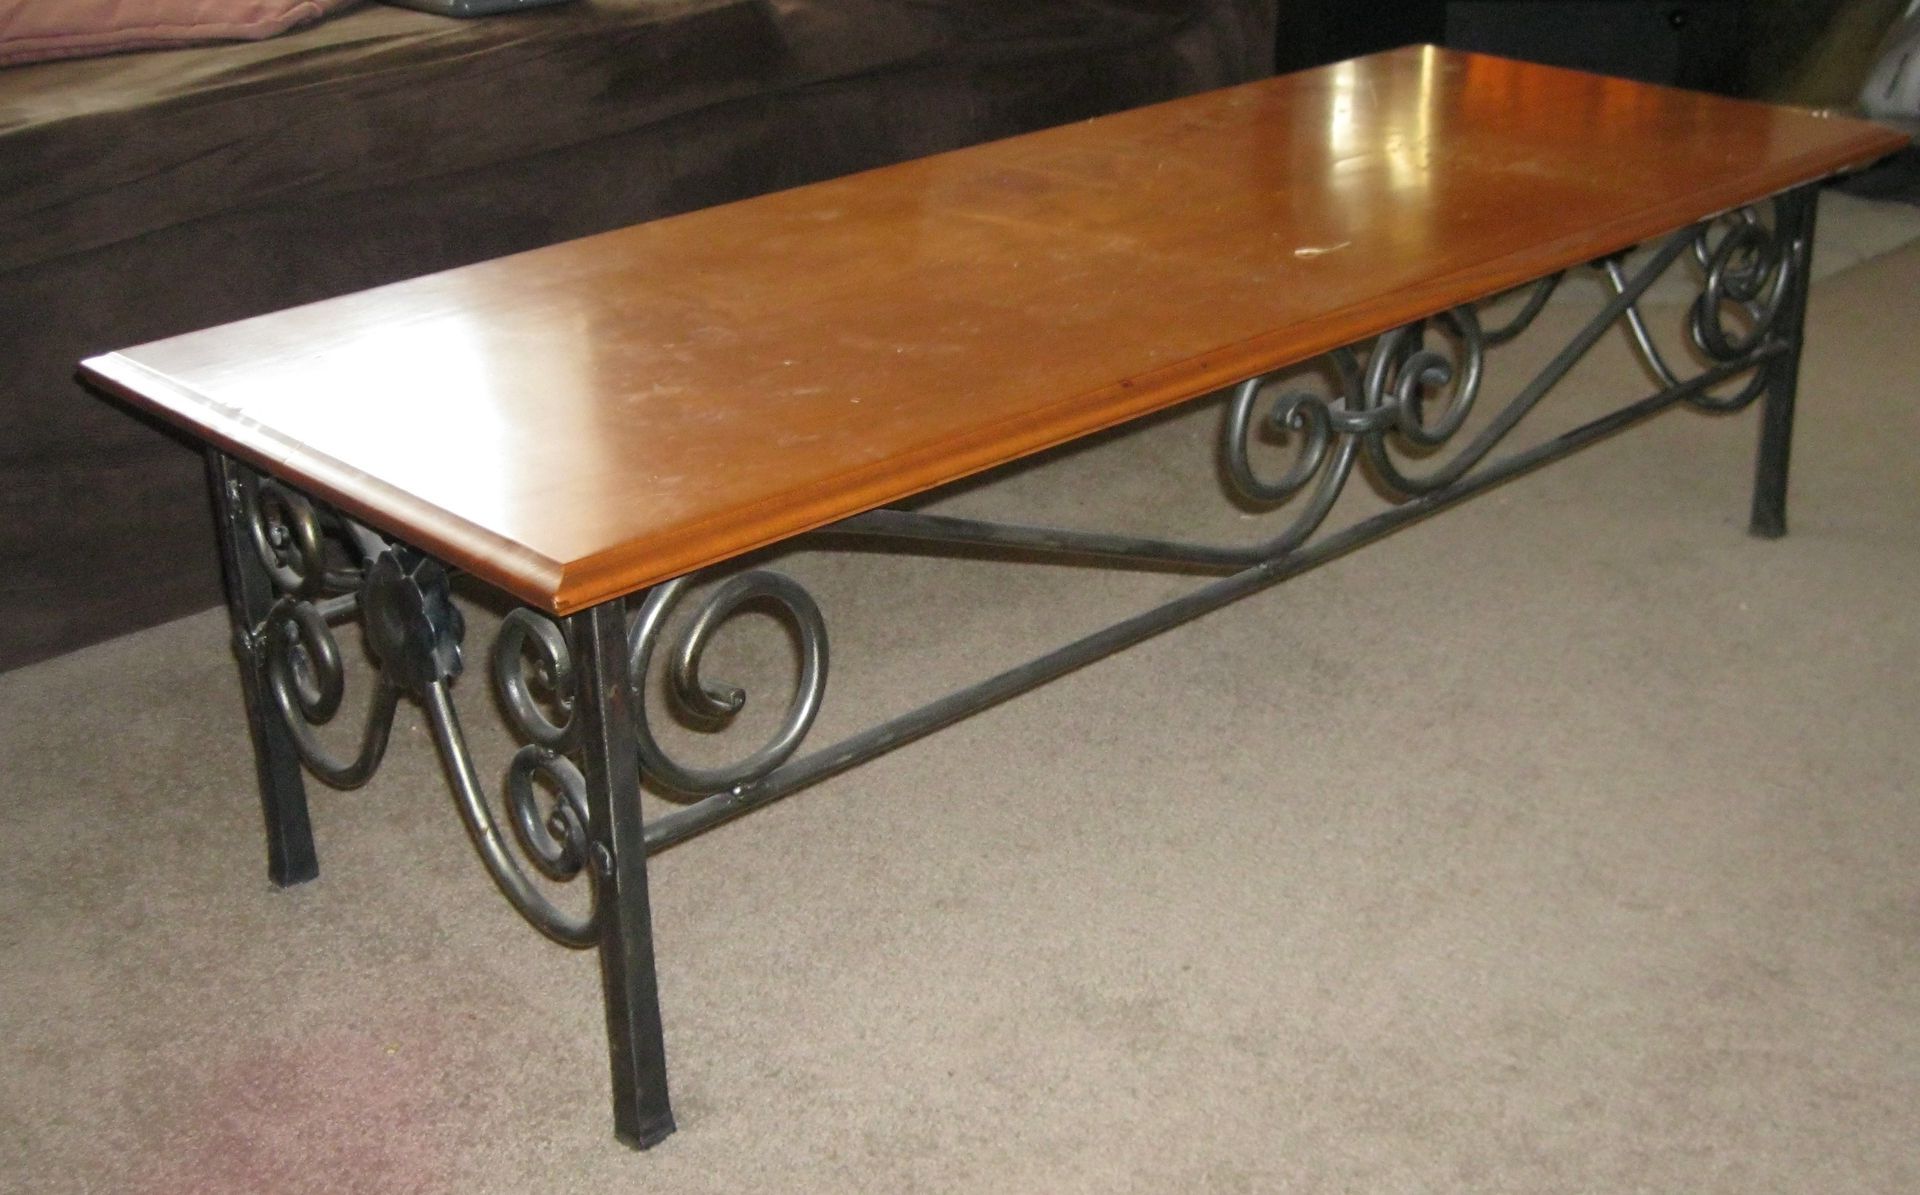 Custommade Pertaining To Newest Iron Wood Coffee Tables With Wheels (View 5 of 20)